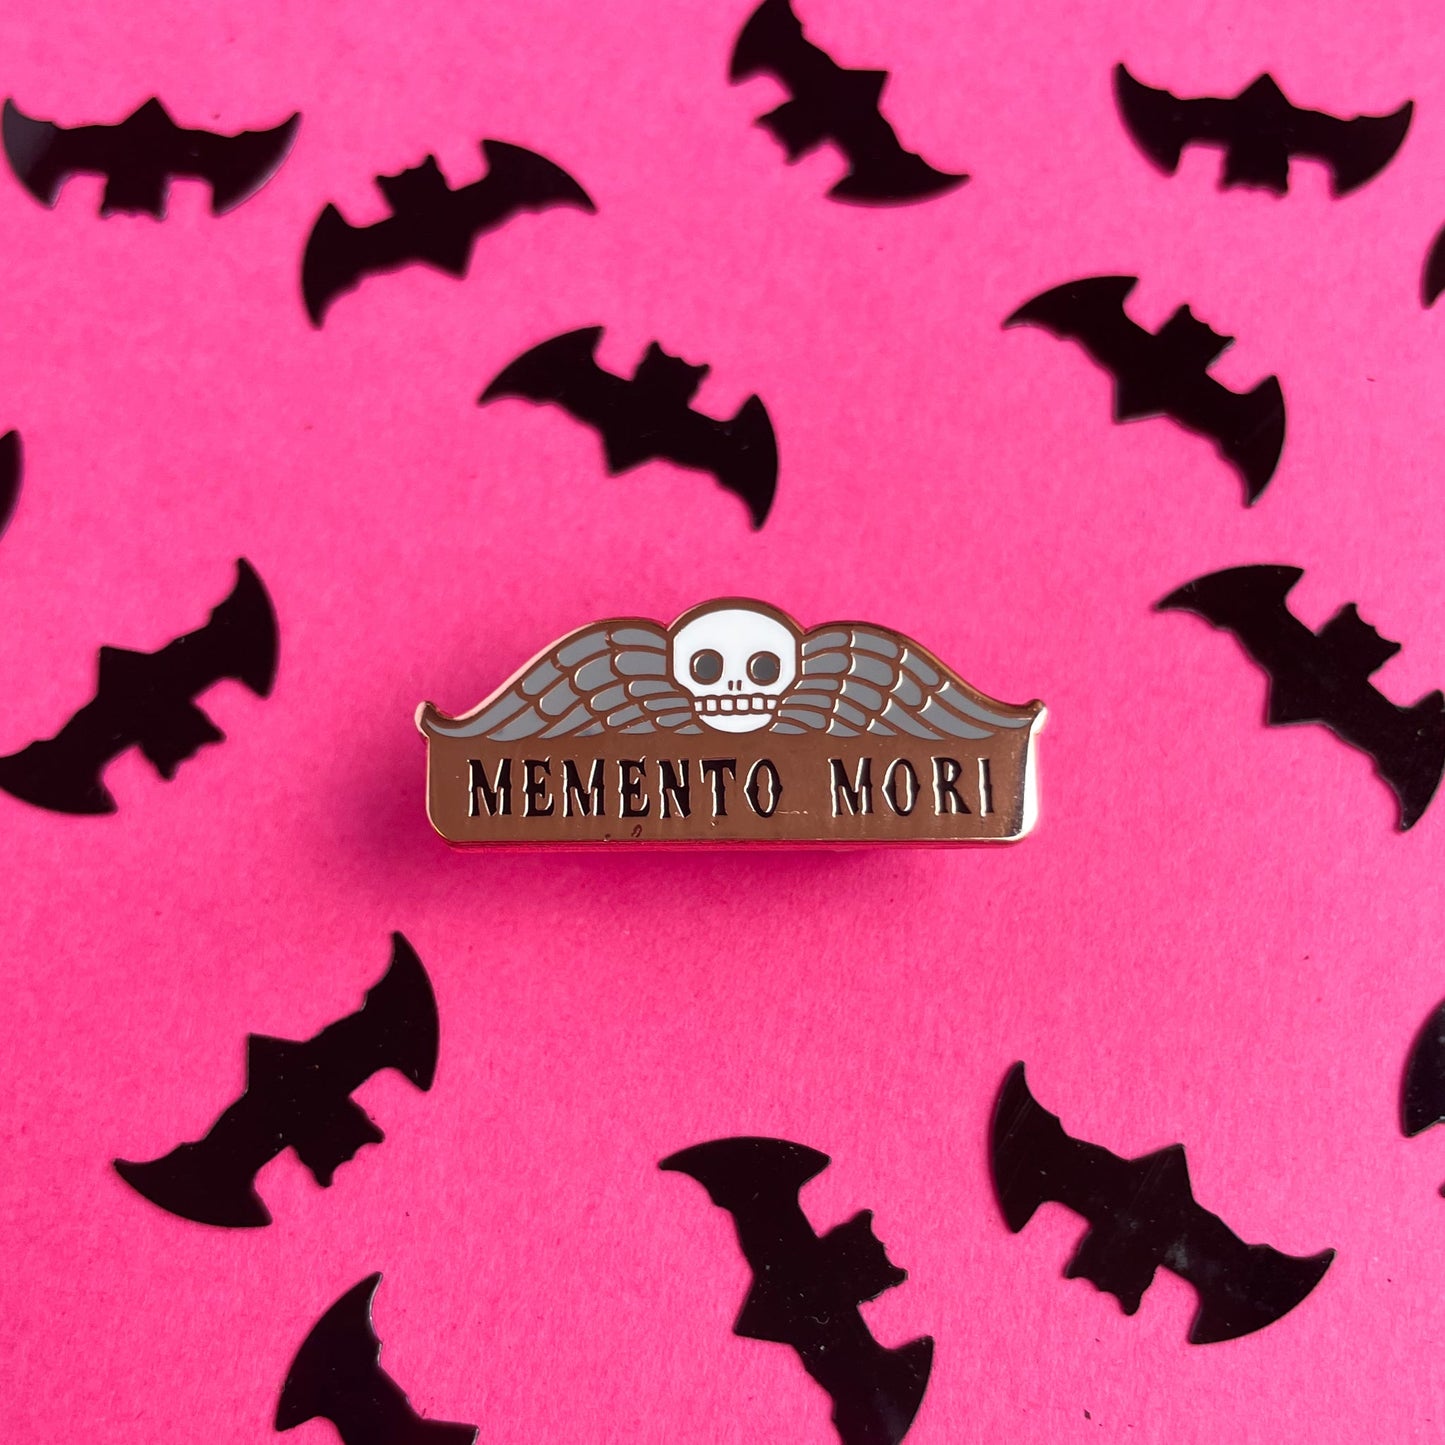 An enamel pin that reads "Memento Mori" with a skull and wings on it on a hot pink background surrounded by bat confetti. 